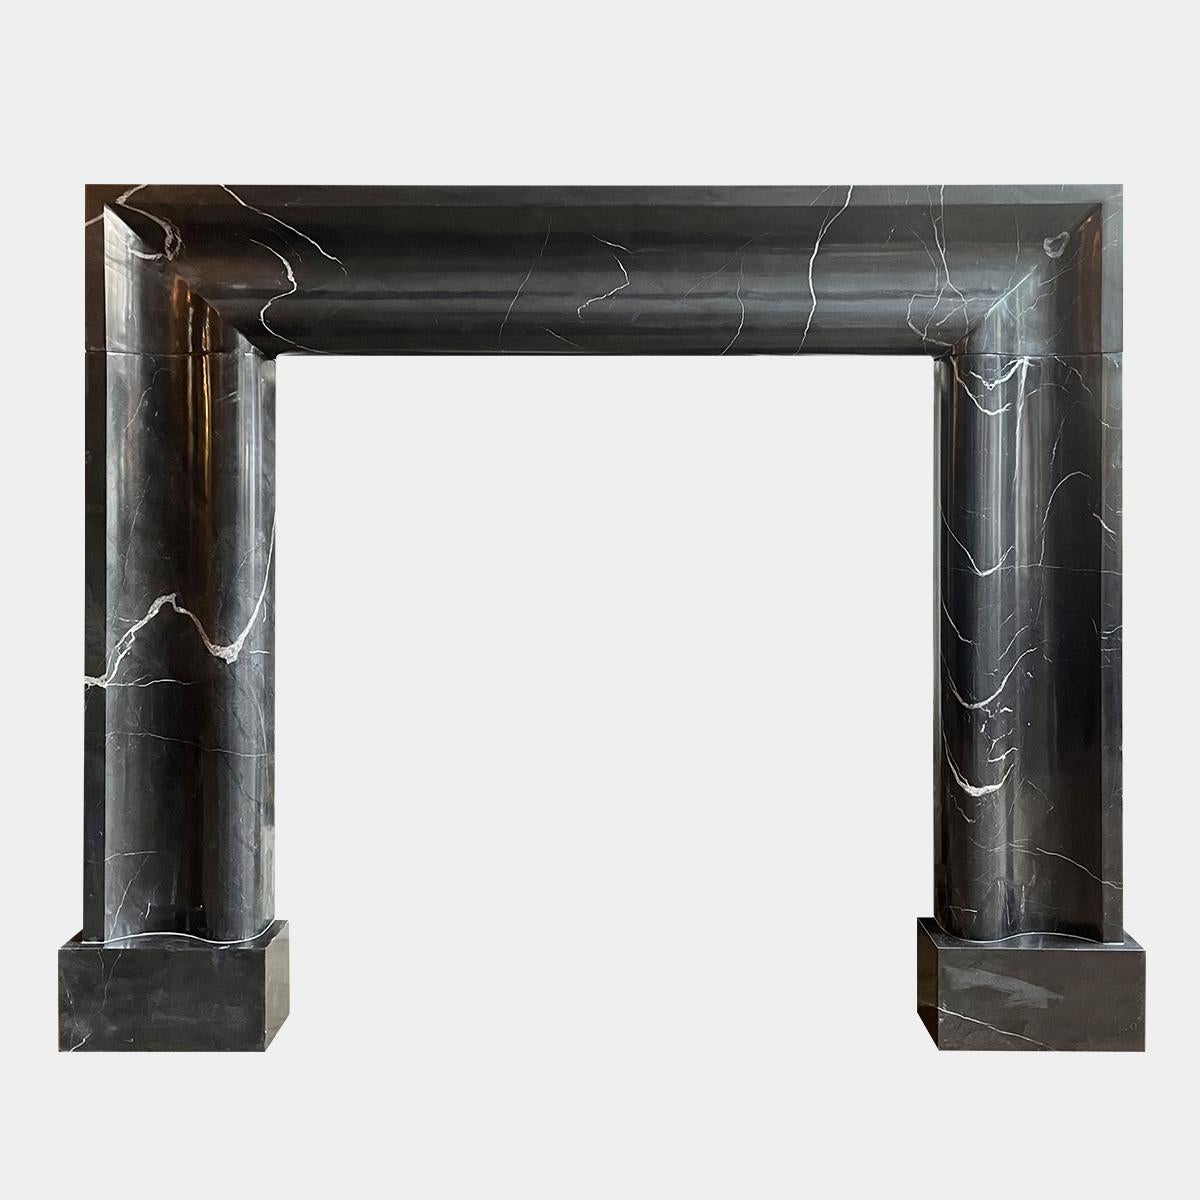 A large Bolection moulded fire surround in Nero Marquina marble. This surround has a wide leg and header moulding supported on large rectangular foot blocks.

Opening Size 

Measures: 101cm w by 102cm h.